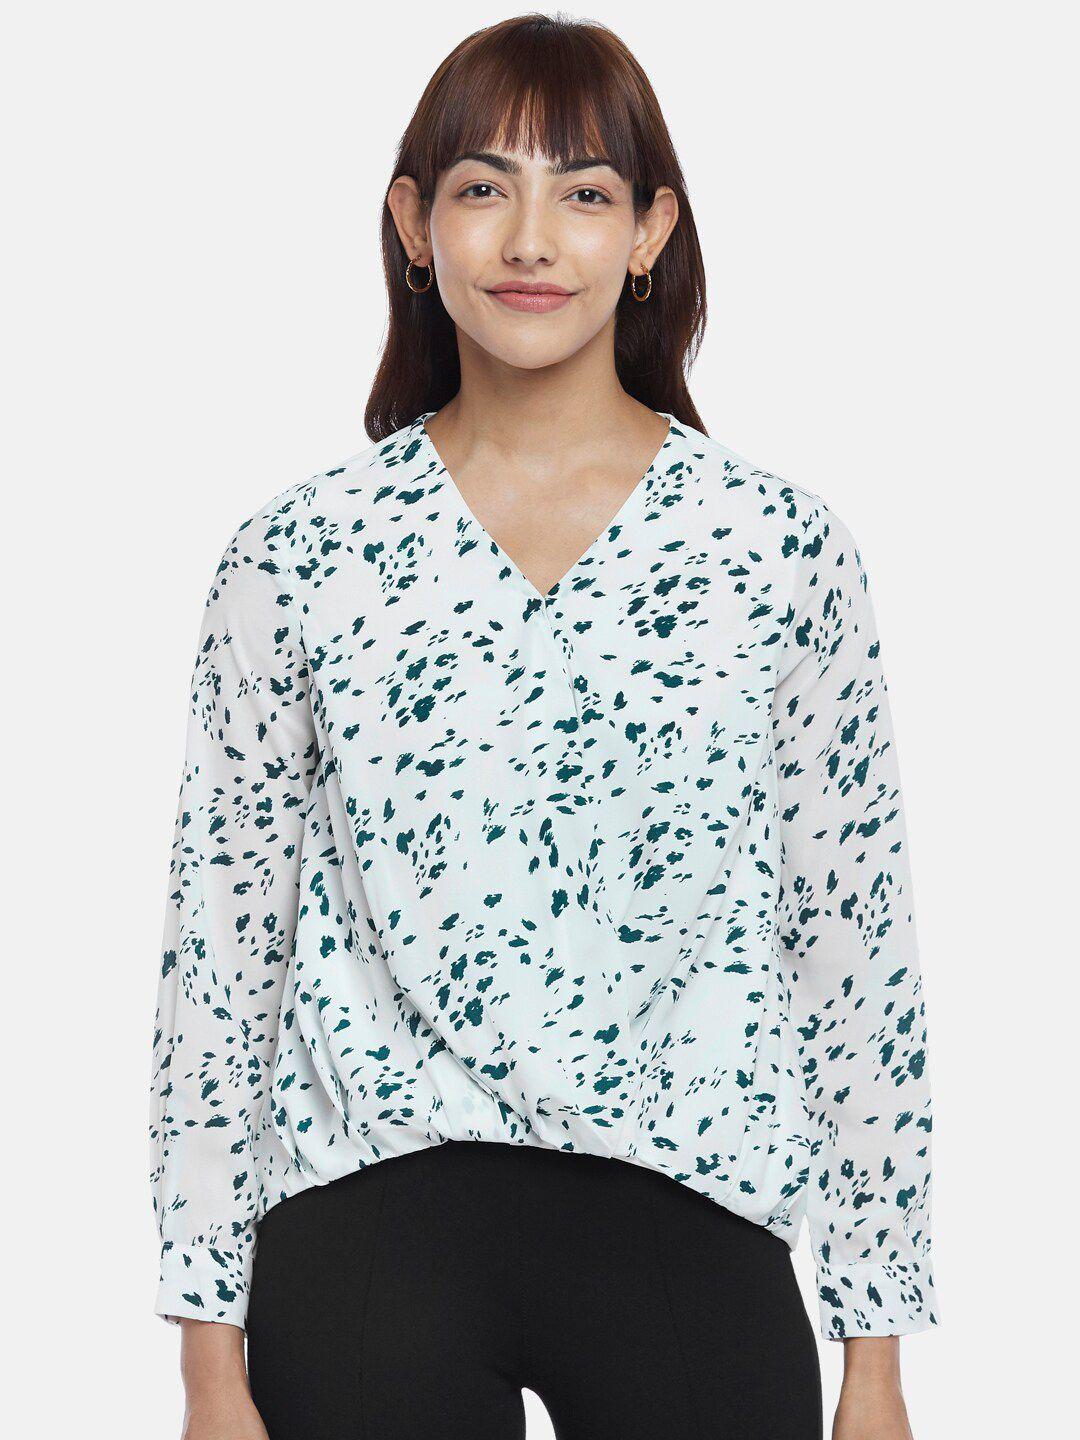 annabelle-by-pantaloons-women-off-white-and-green-abstract-print-v-neck-frill-top